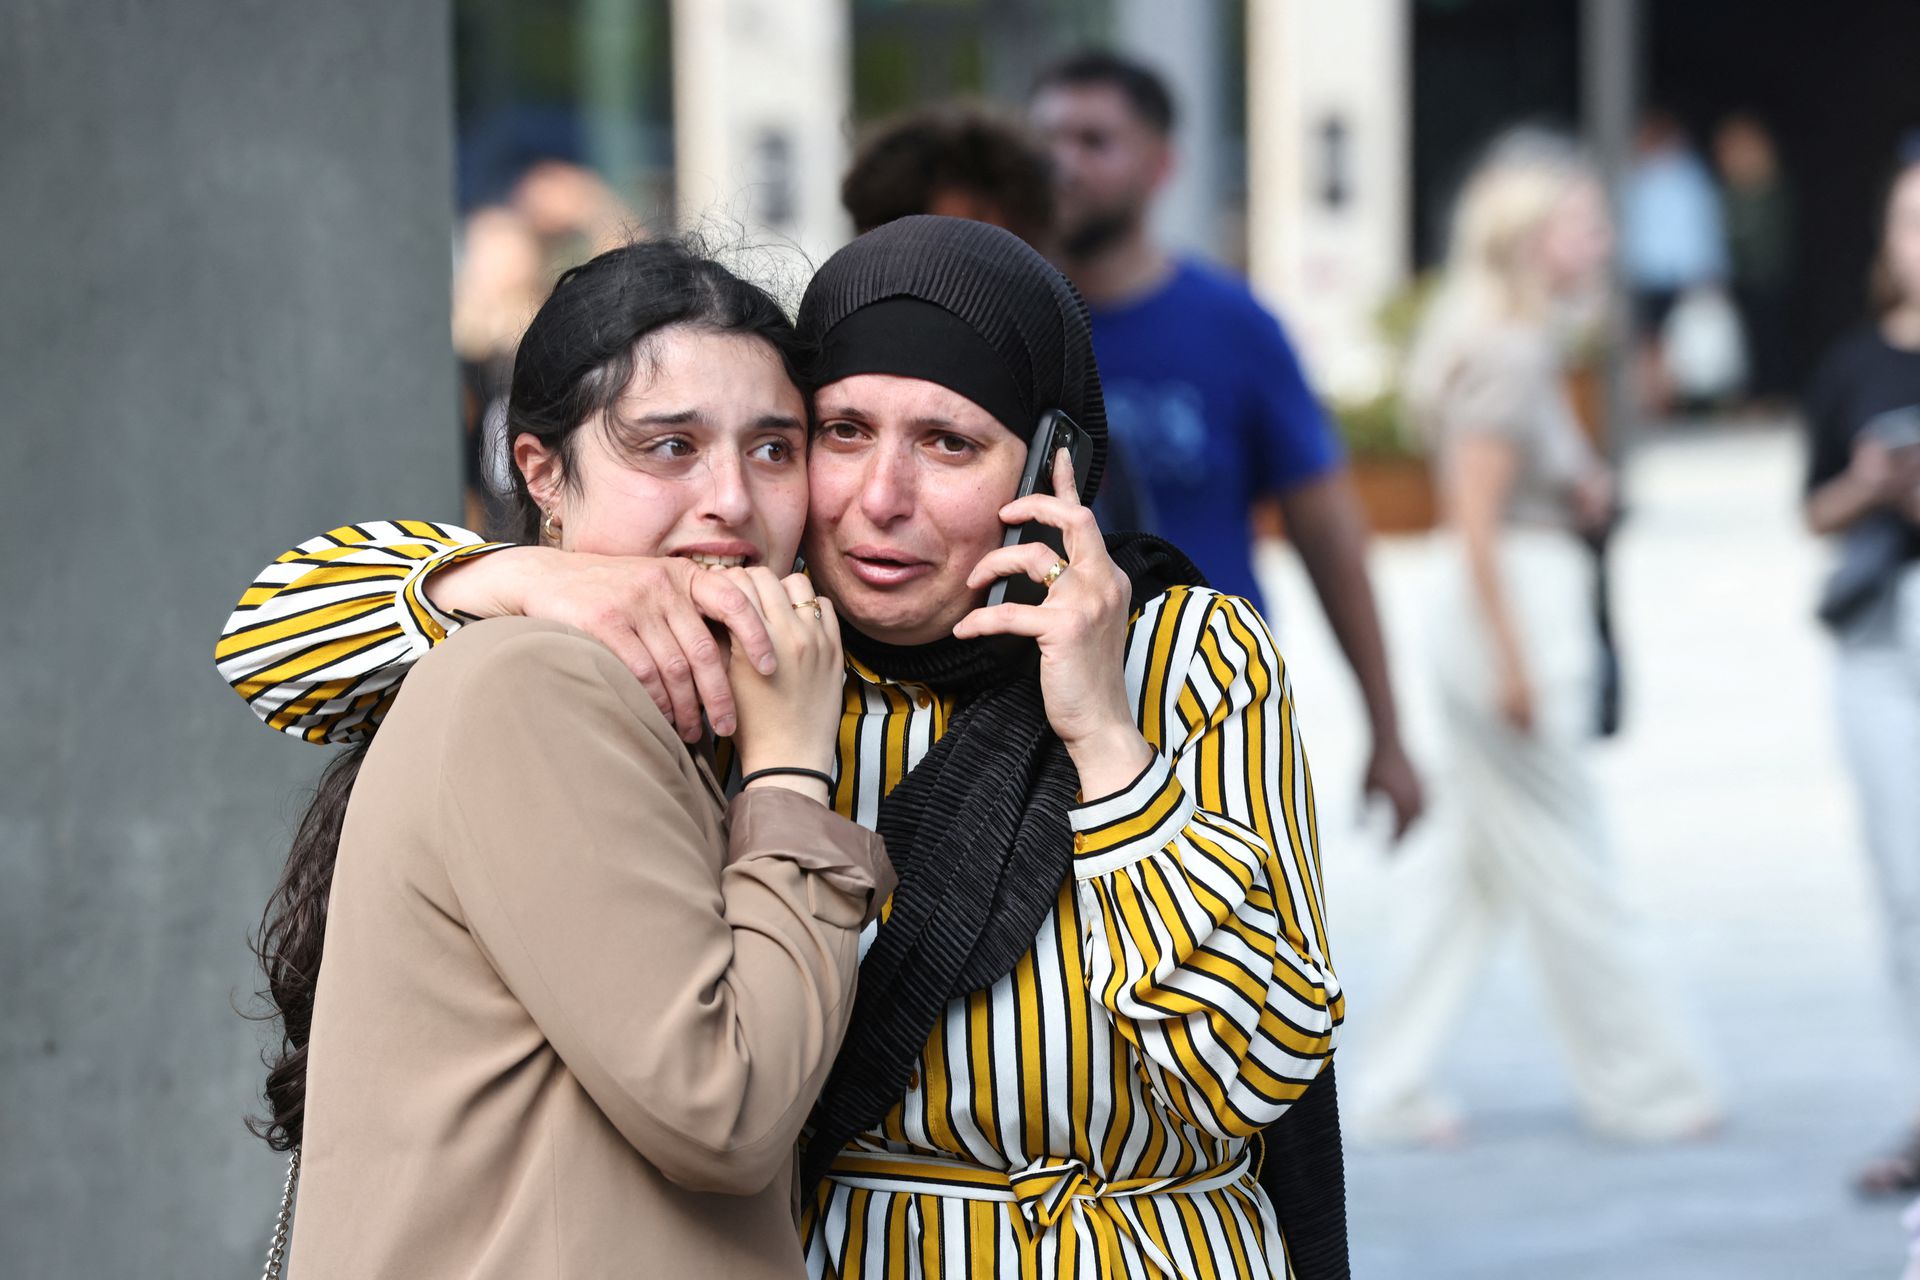 People react outside Field's shopping centre, after Danish police said they received reports of shooting, in Copenhagen, Denmark, July 3, 2022. Ritzau Scanpix/Olafur Steinar Gestsson via REUTERS